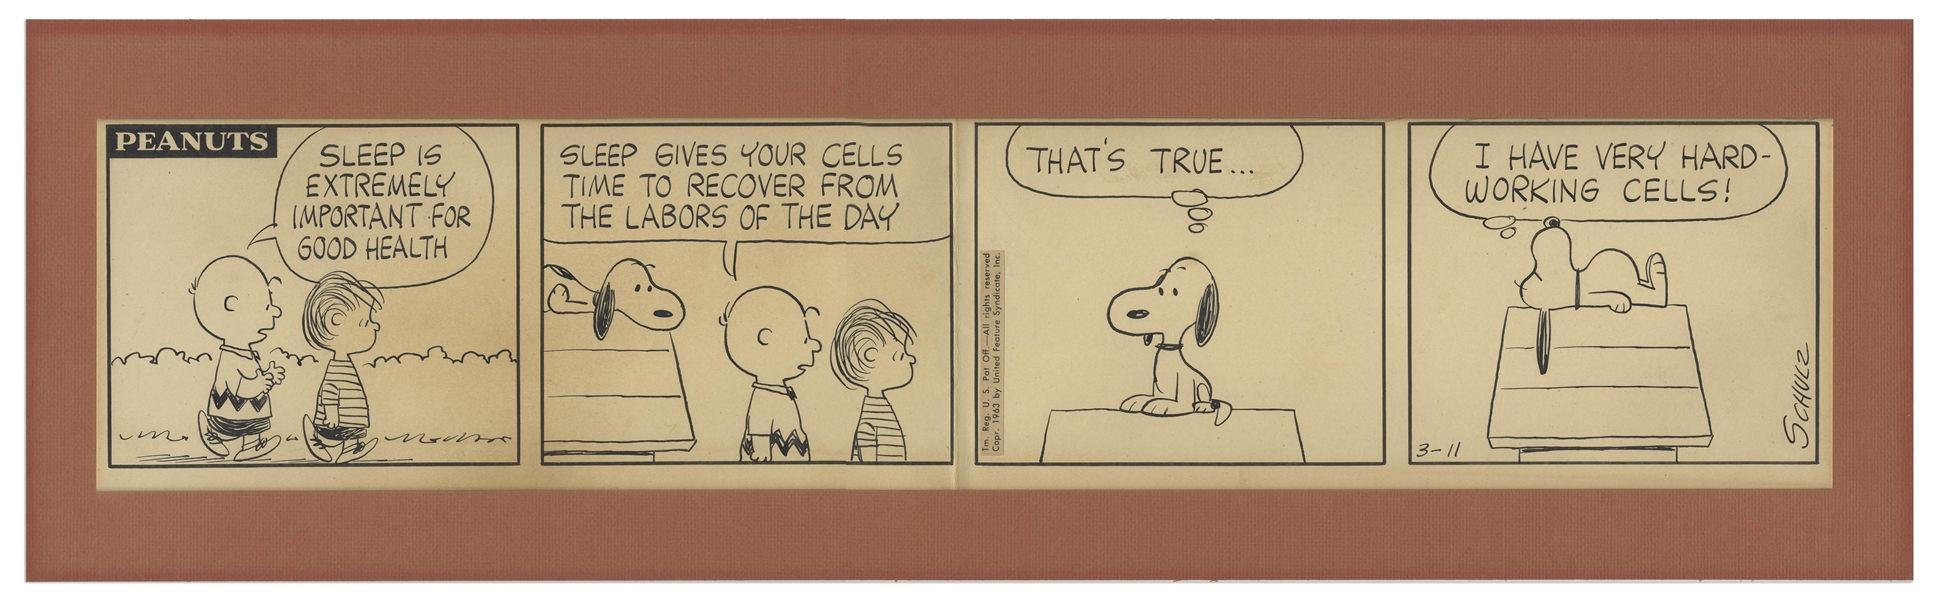 Charles Schulz Hand-Drawn ''Peanuts'' Comic Strip -- Featuring Charlie Brown and Snoopy From 1963 During the Golden Age of ''Peanuts''